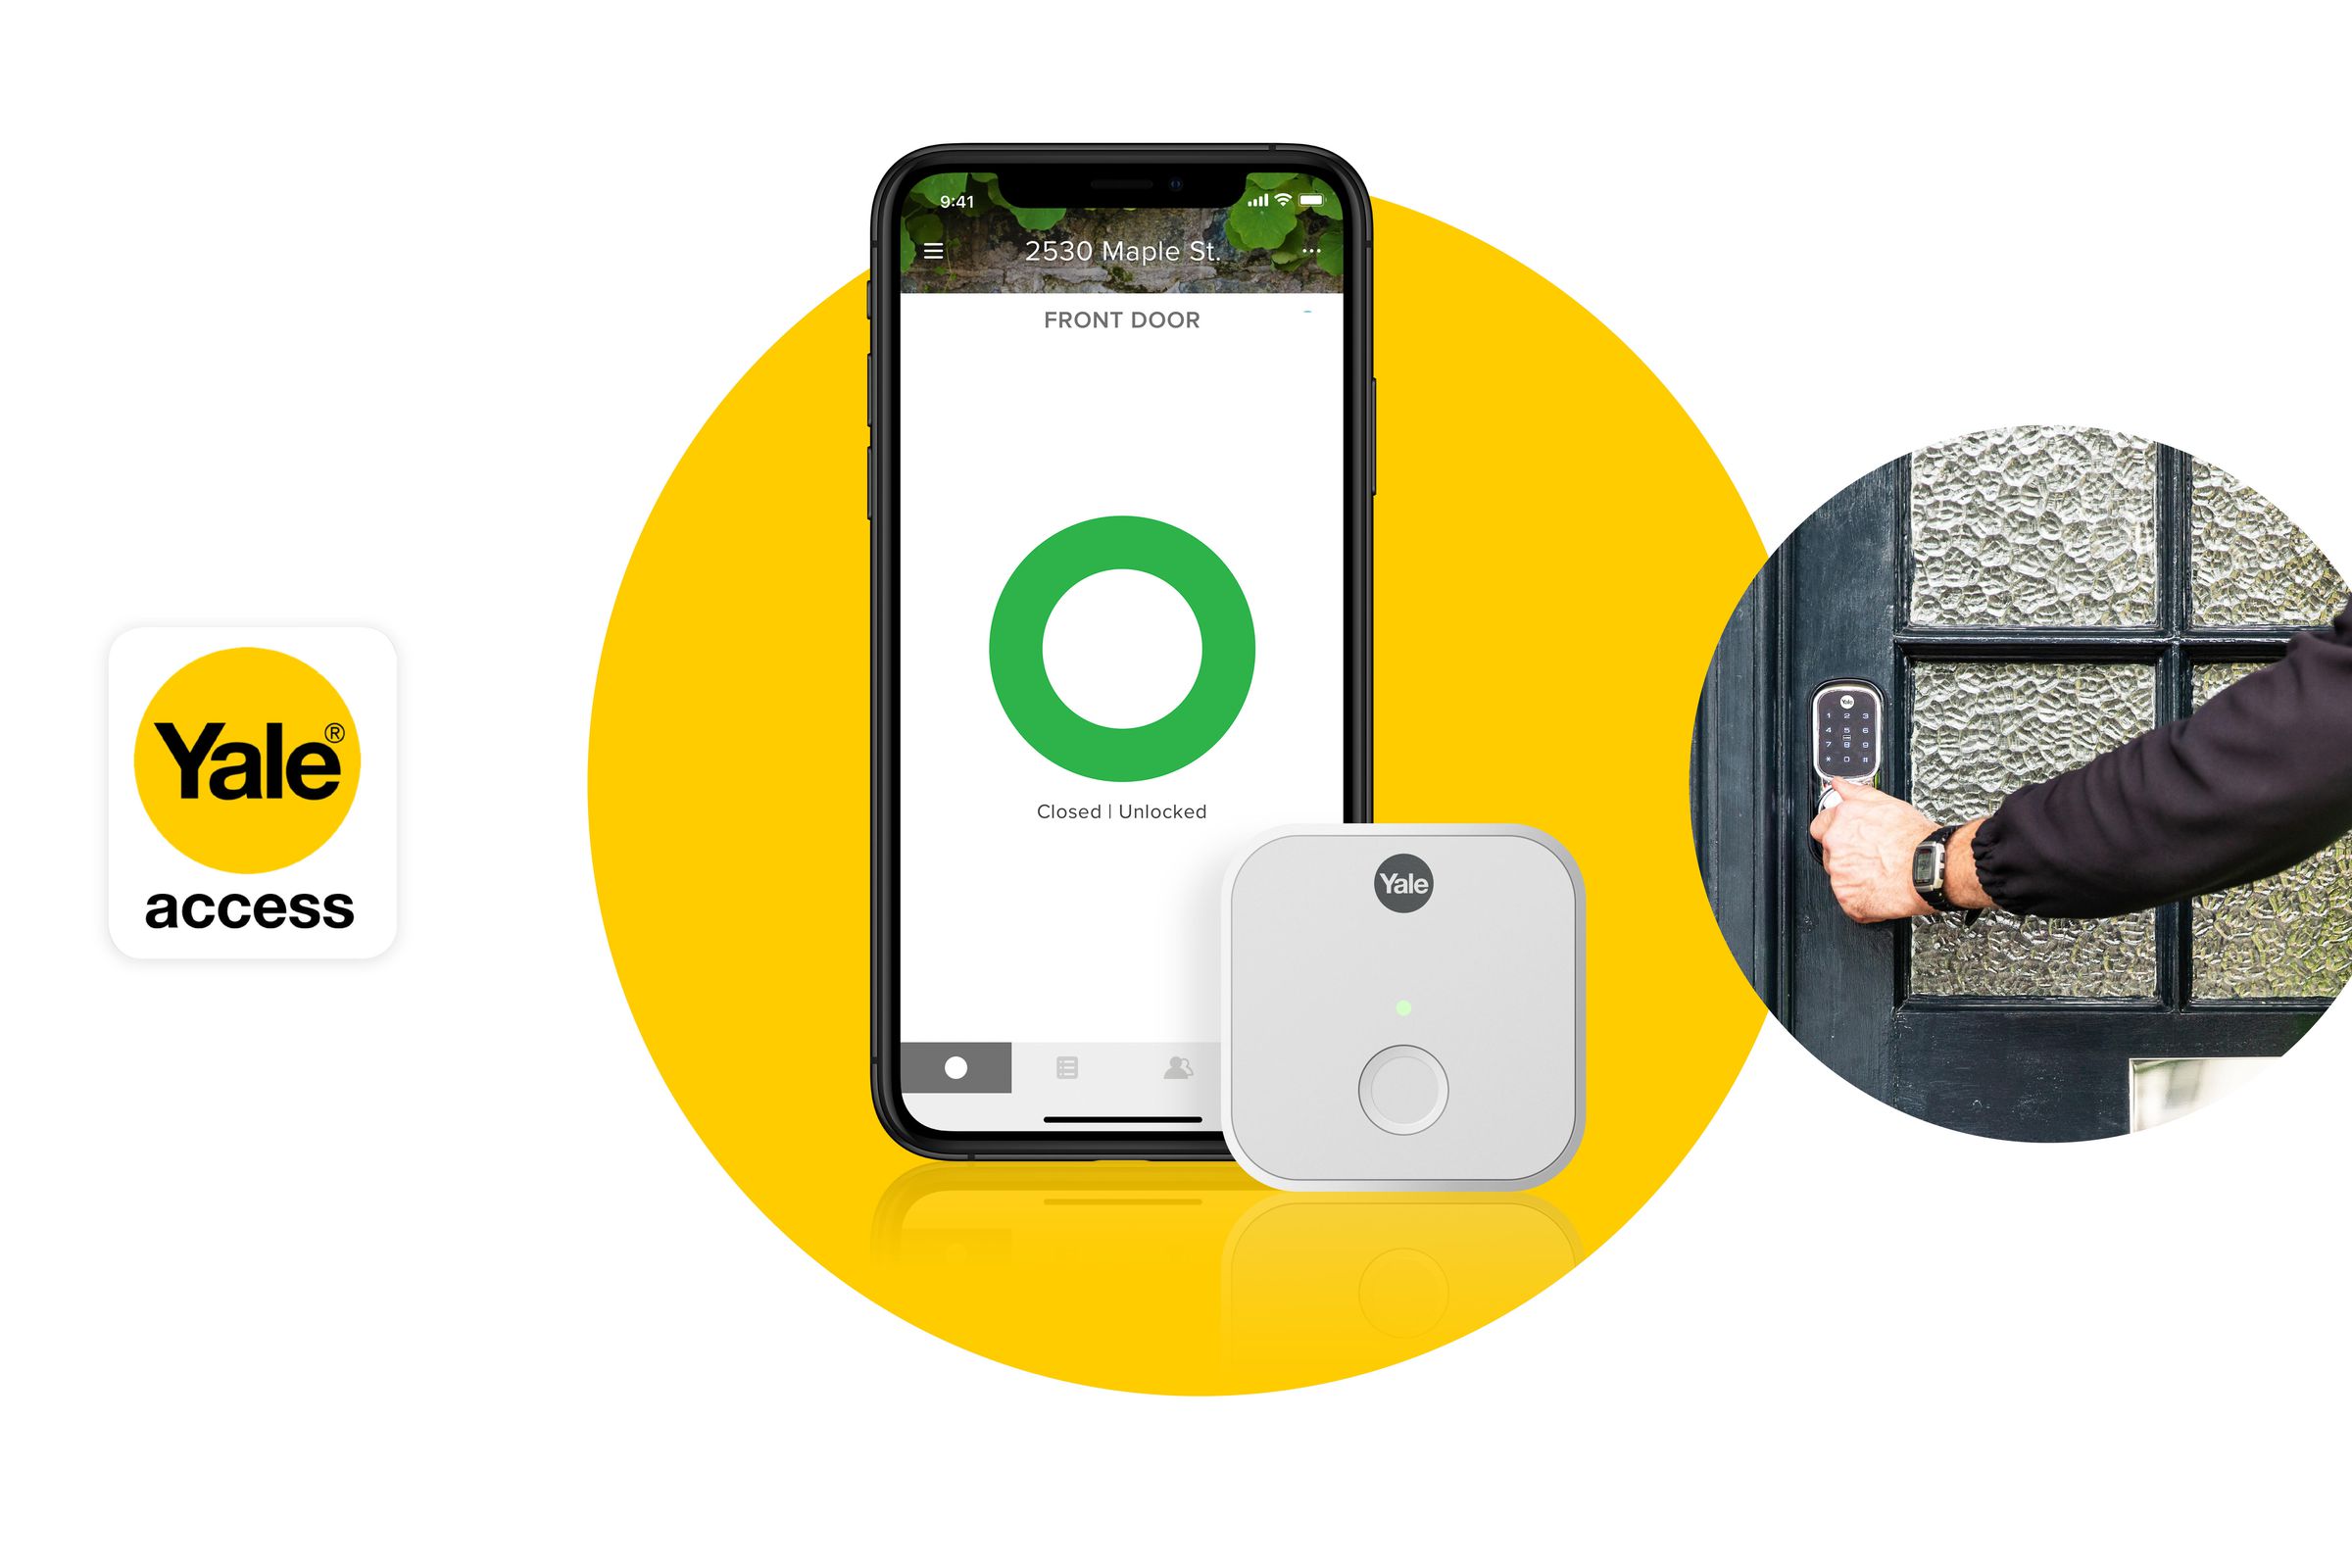 The module will allow Yale’s European smart locks (pictured: right) to be compatible with August’s app platform (pictured: center).